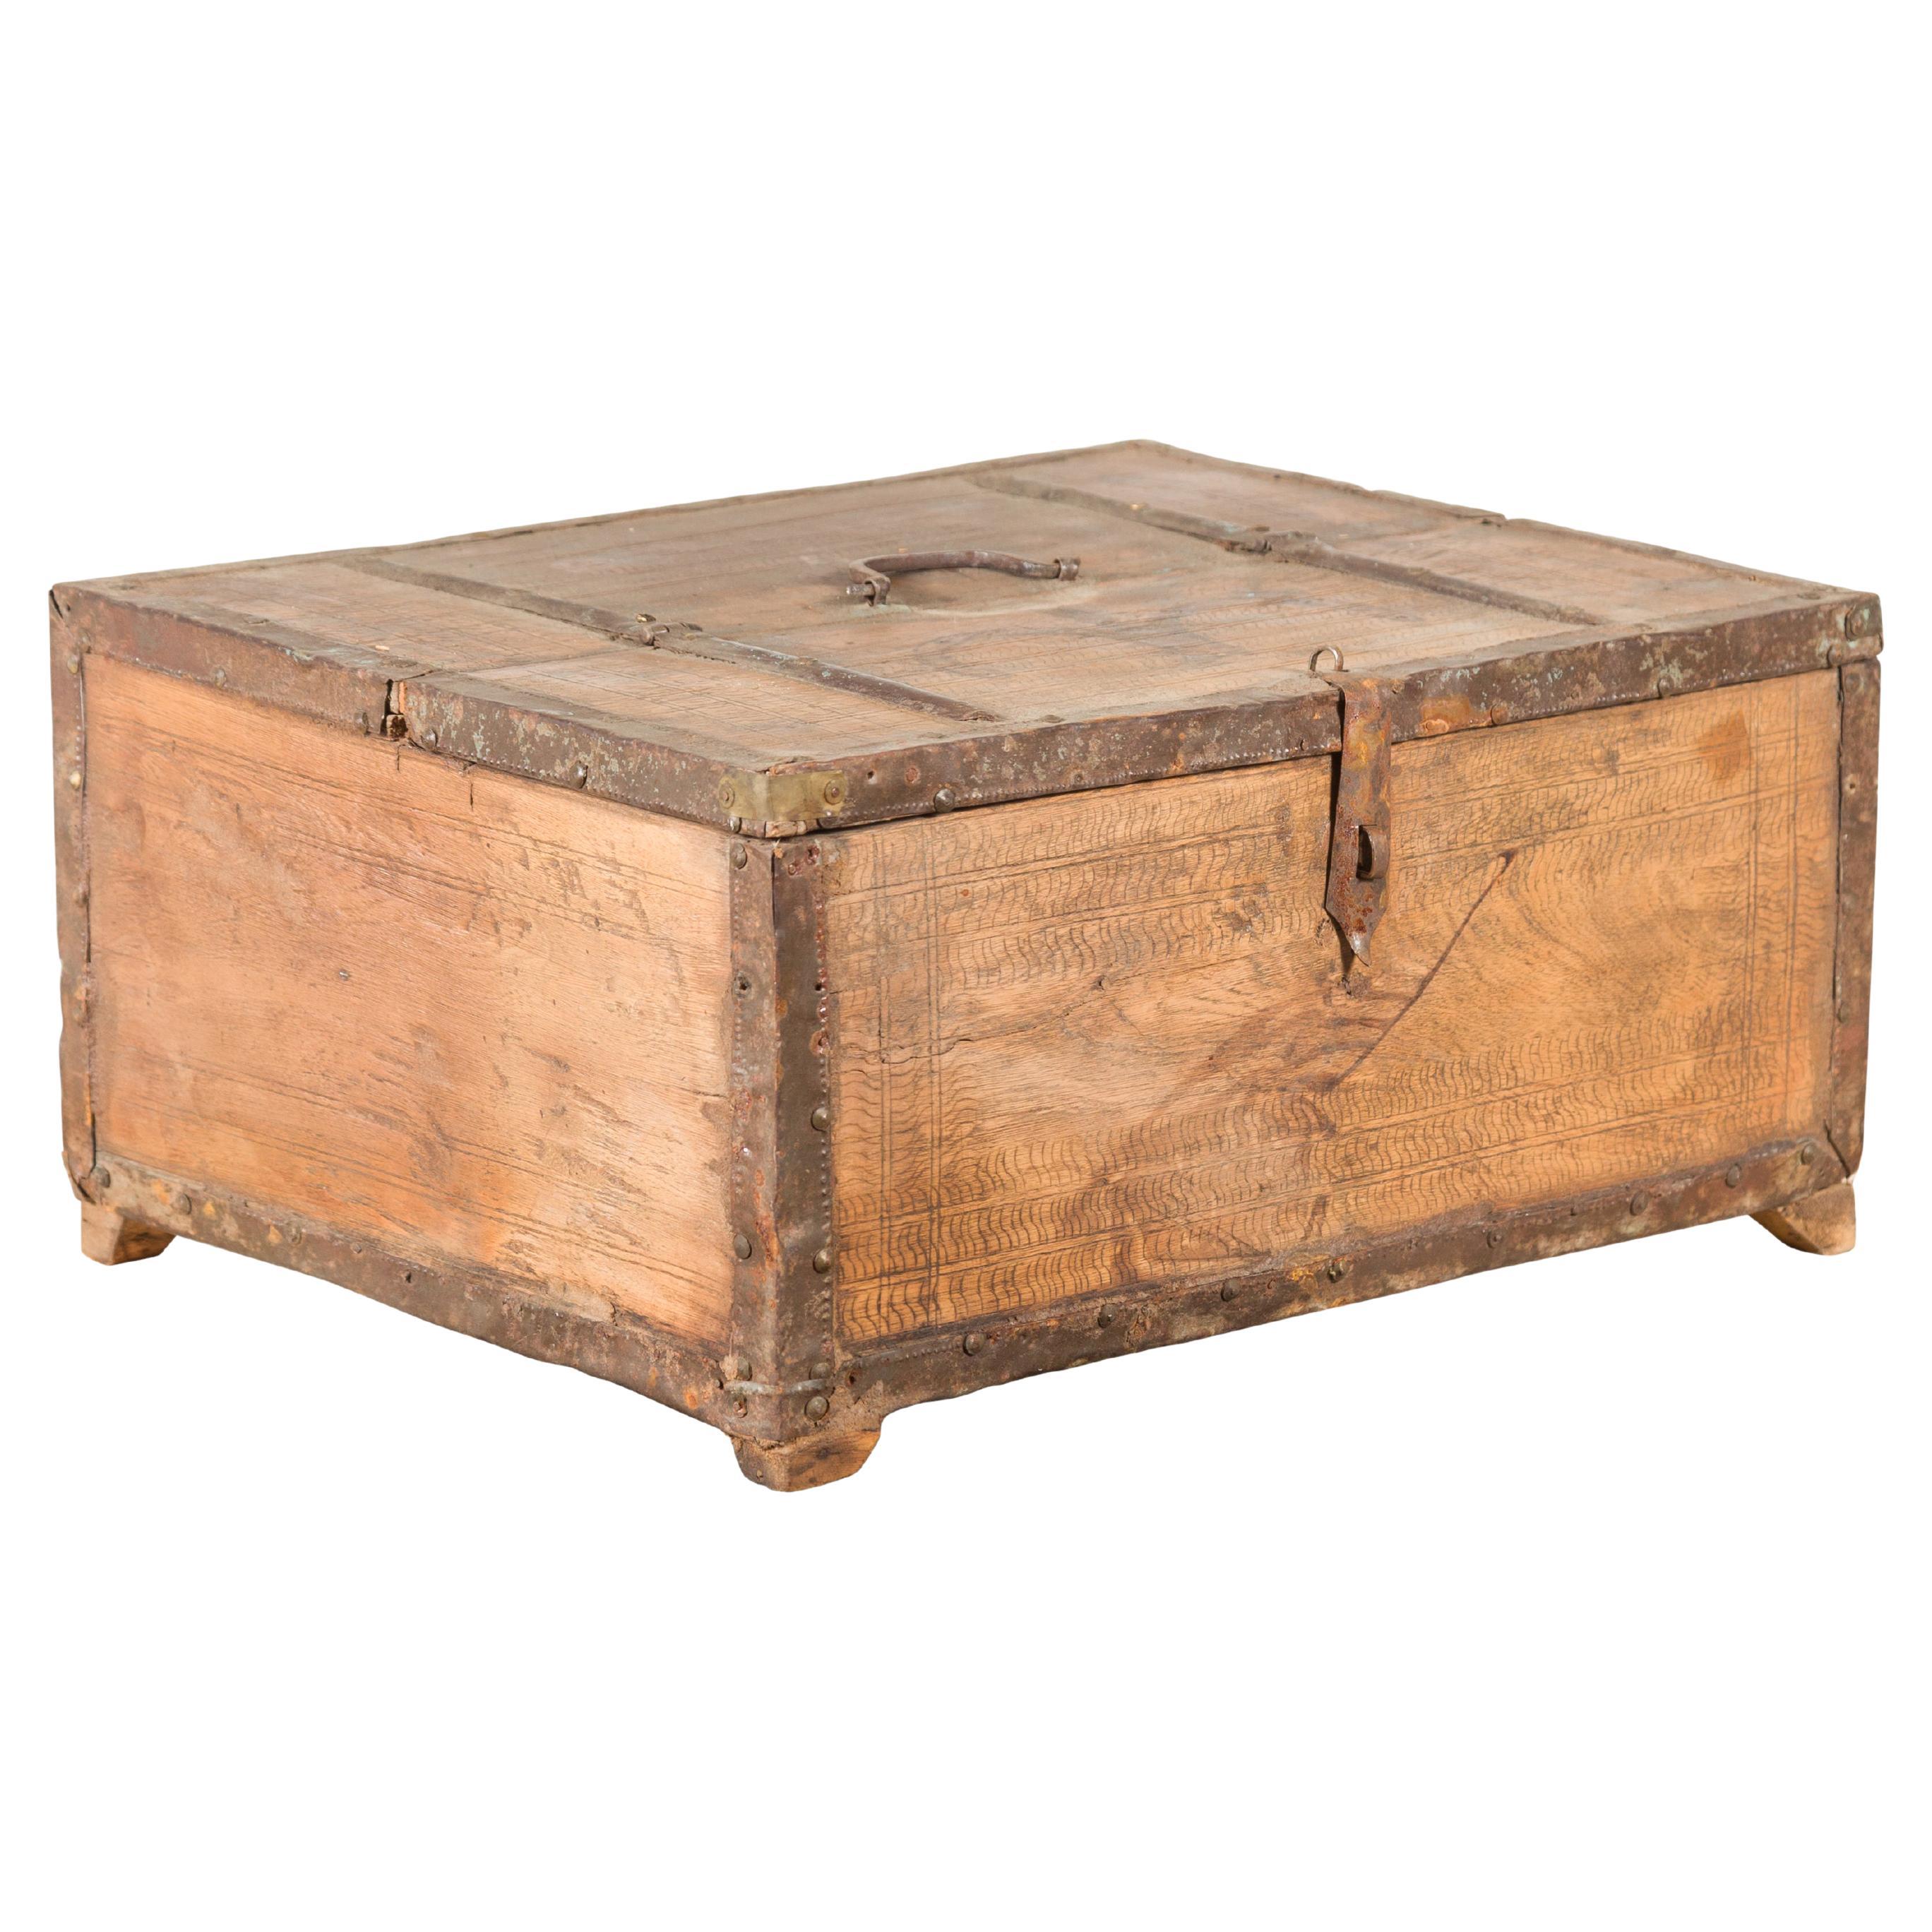 Rustic Indian 19th Century Wooden Box with Iron Details and Incised Motifs